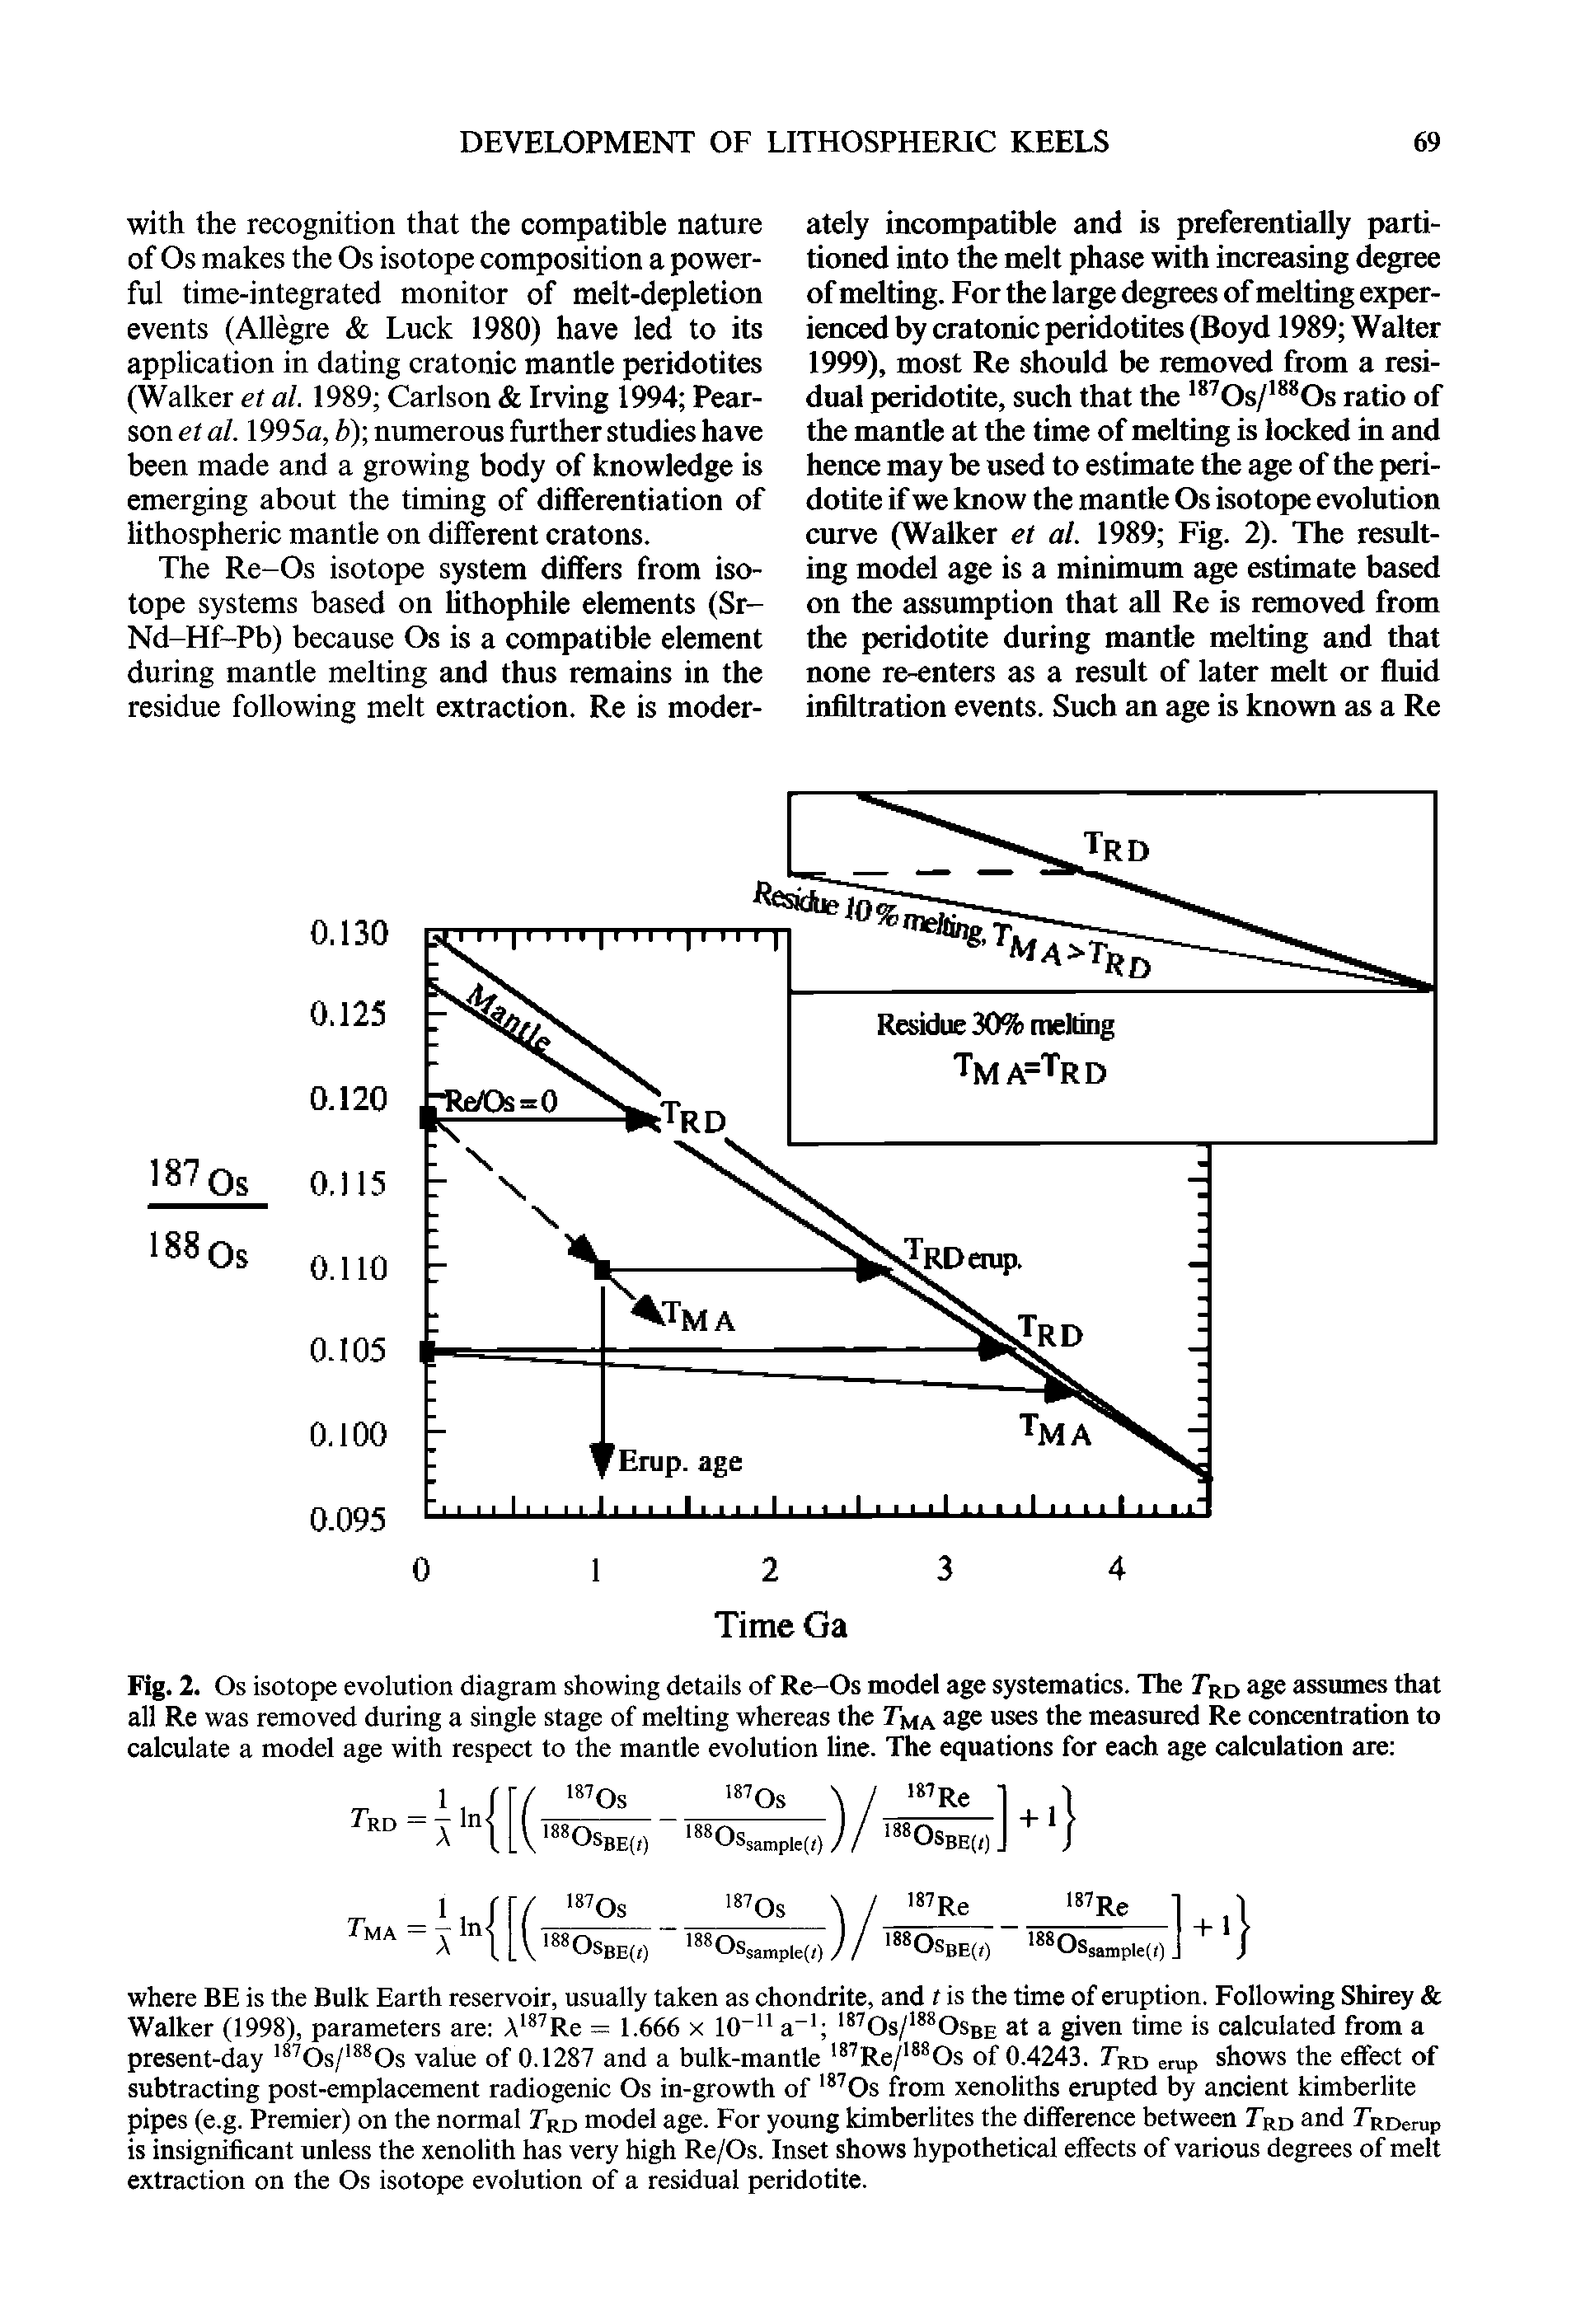 Fig. 2. Os isotope evolution diagram showing details of Re-Os model age systematics. The Trd age assumes that all Re was removed during a single stage of melting whereas the Tma age uses the measured Re concentration to calculate a model age with respect to the mantle evolution line. The equations for each age calculation are ...